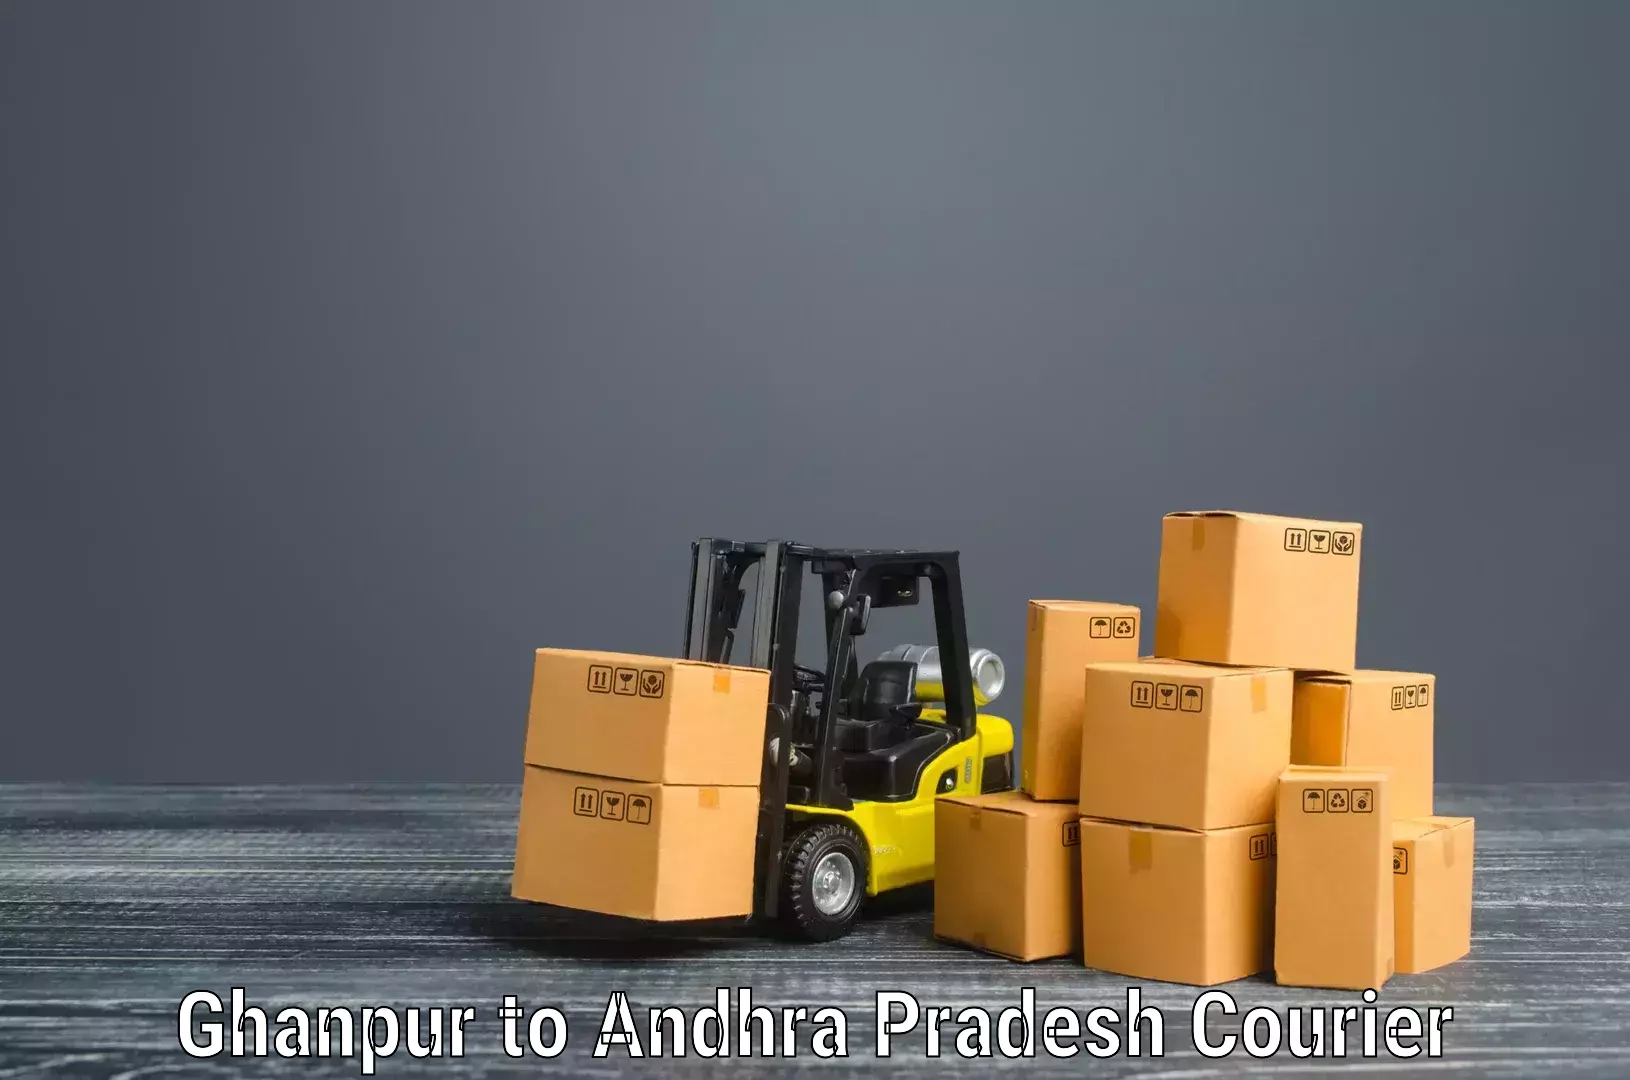 Furniture delivery service Ghanpur to Anakapalli